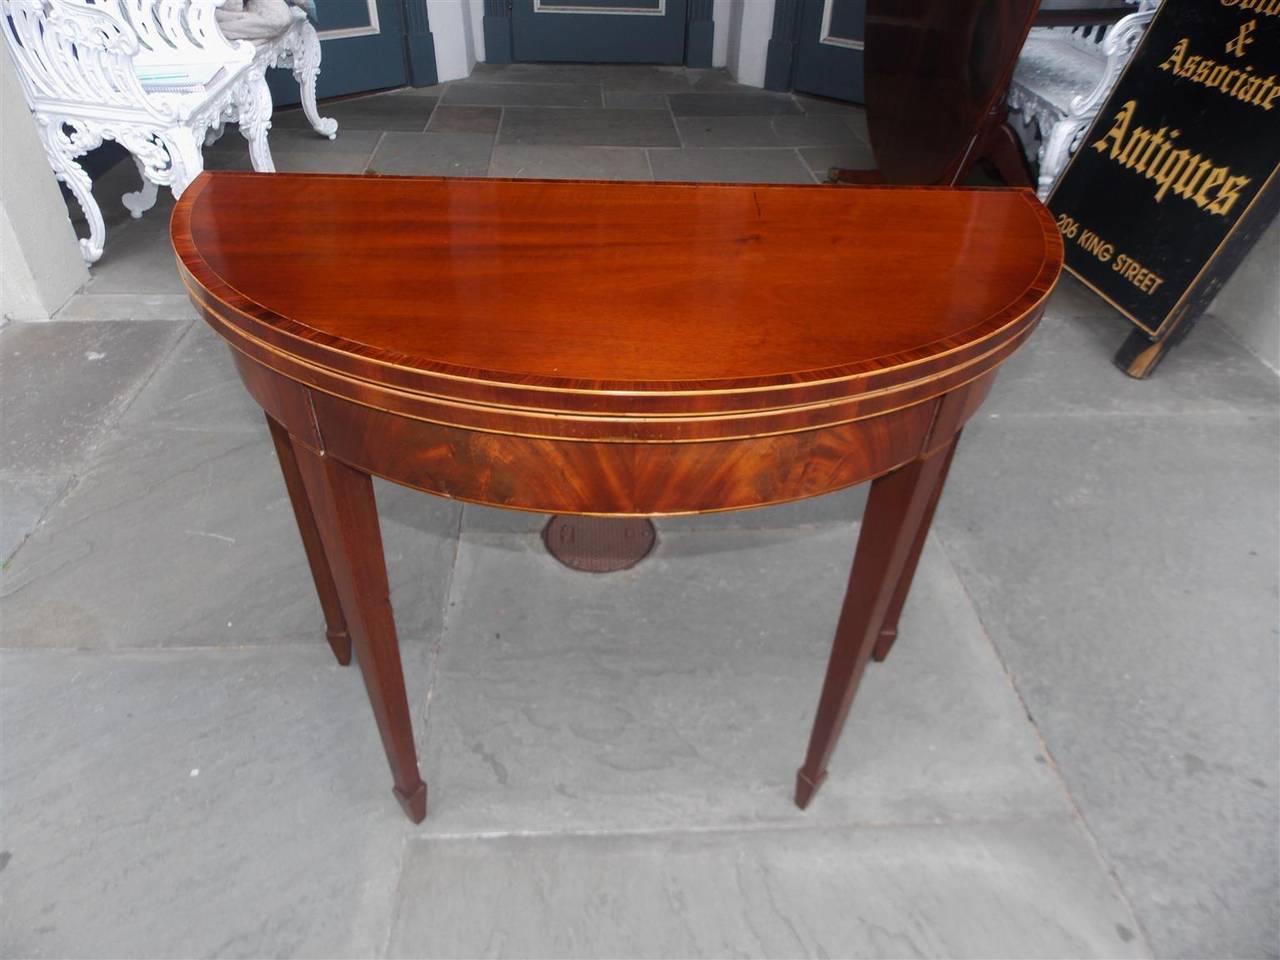 English Hepplewhite crotch mahogany flip top game table with Satinwood string inlay, Tulip wood cross banding, baise lined interior and terminating on tapered squared legs with spade feet. Late 18th Century